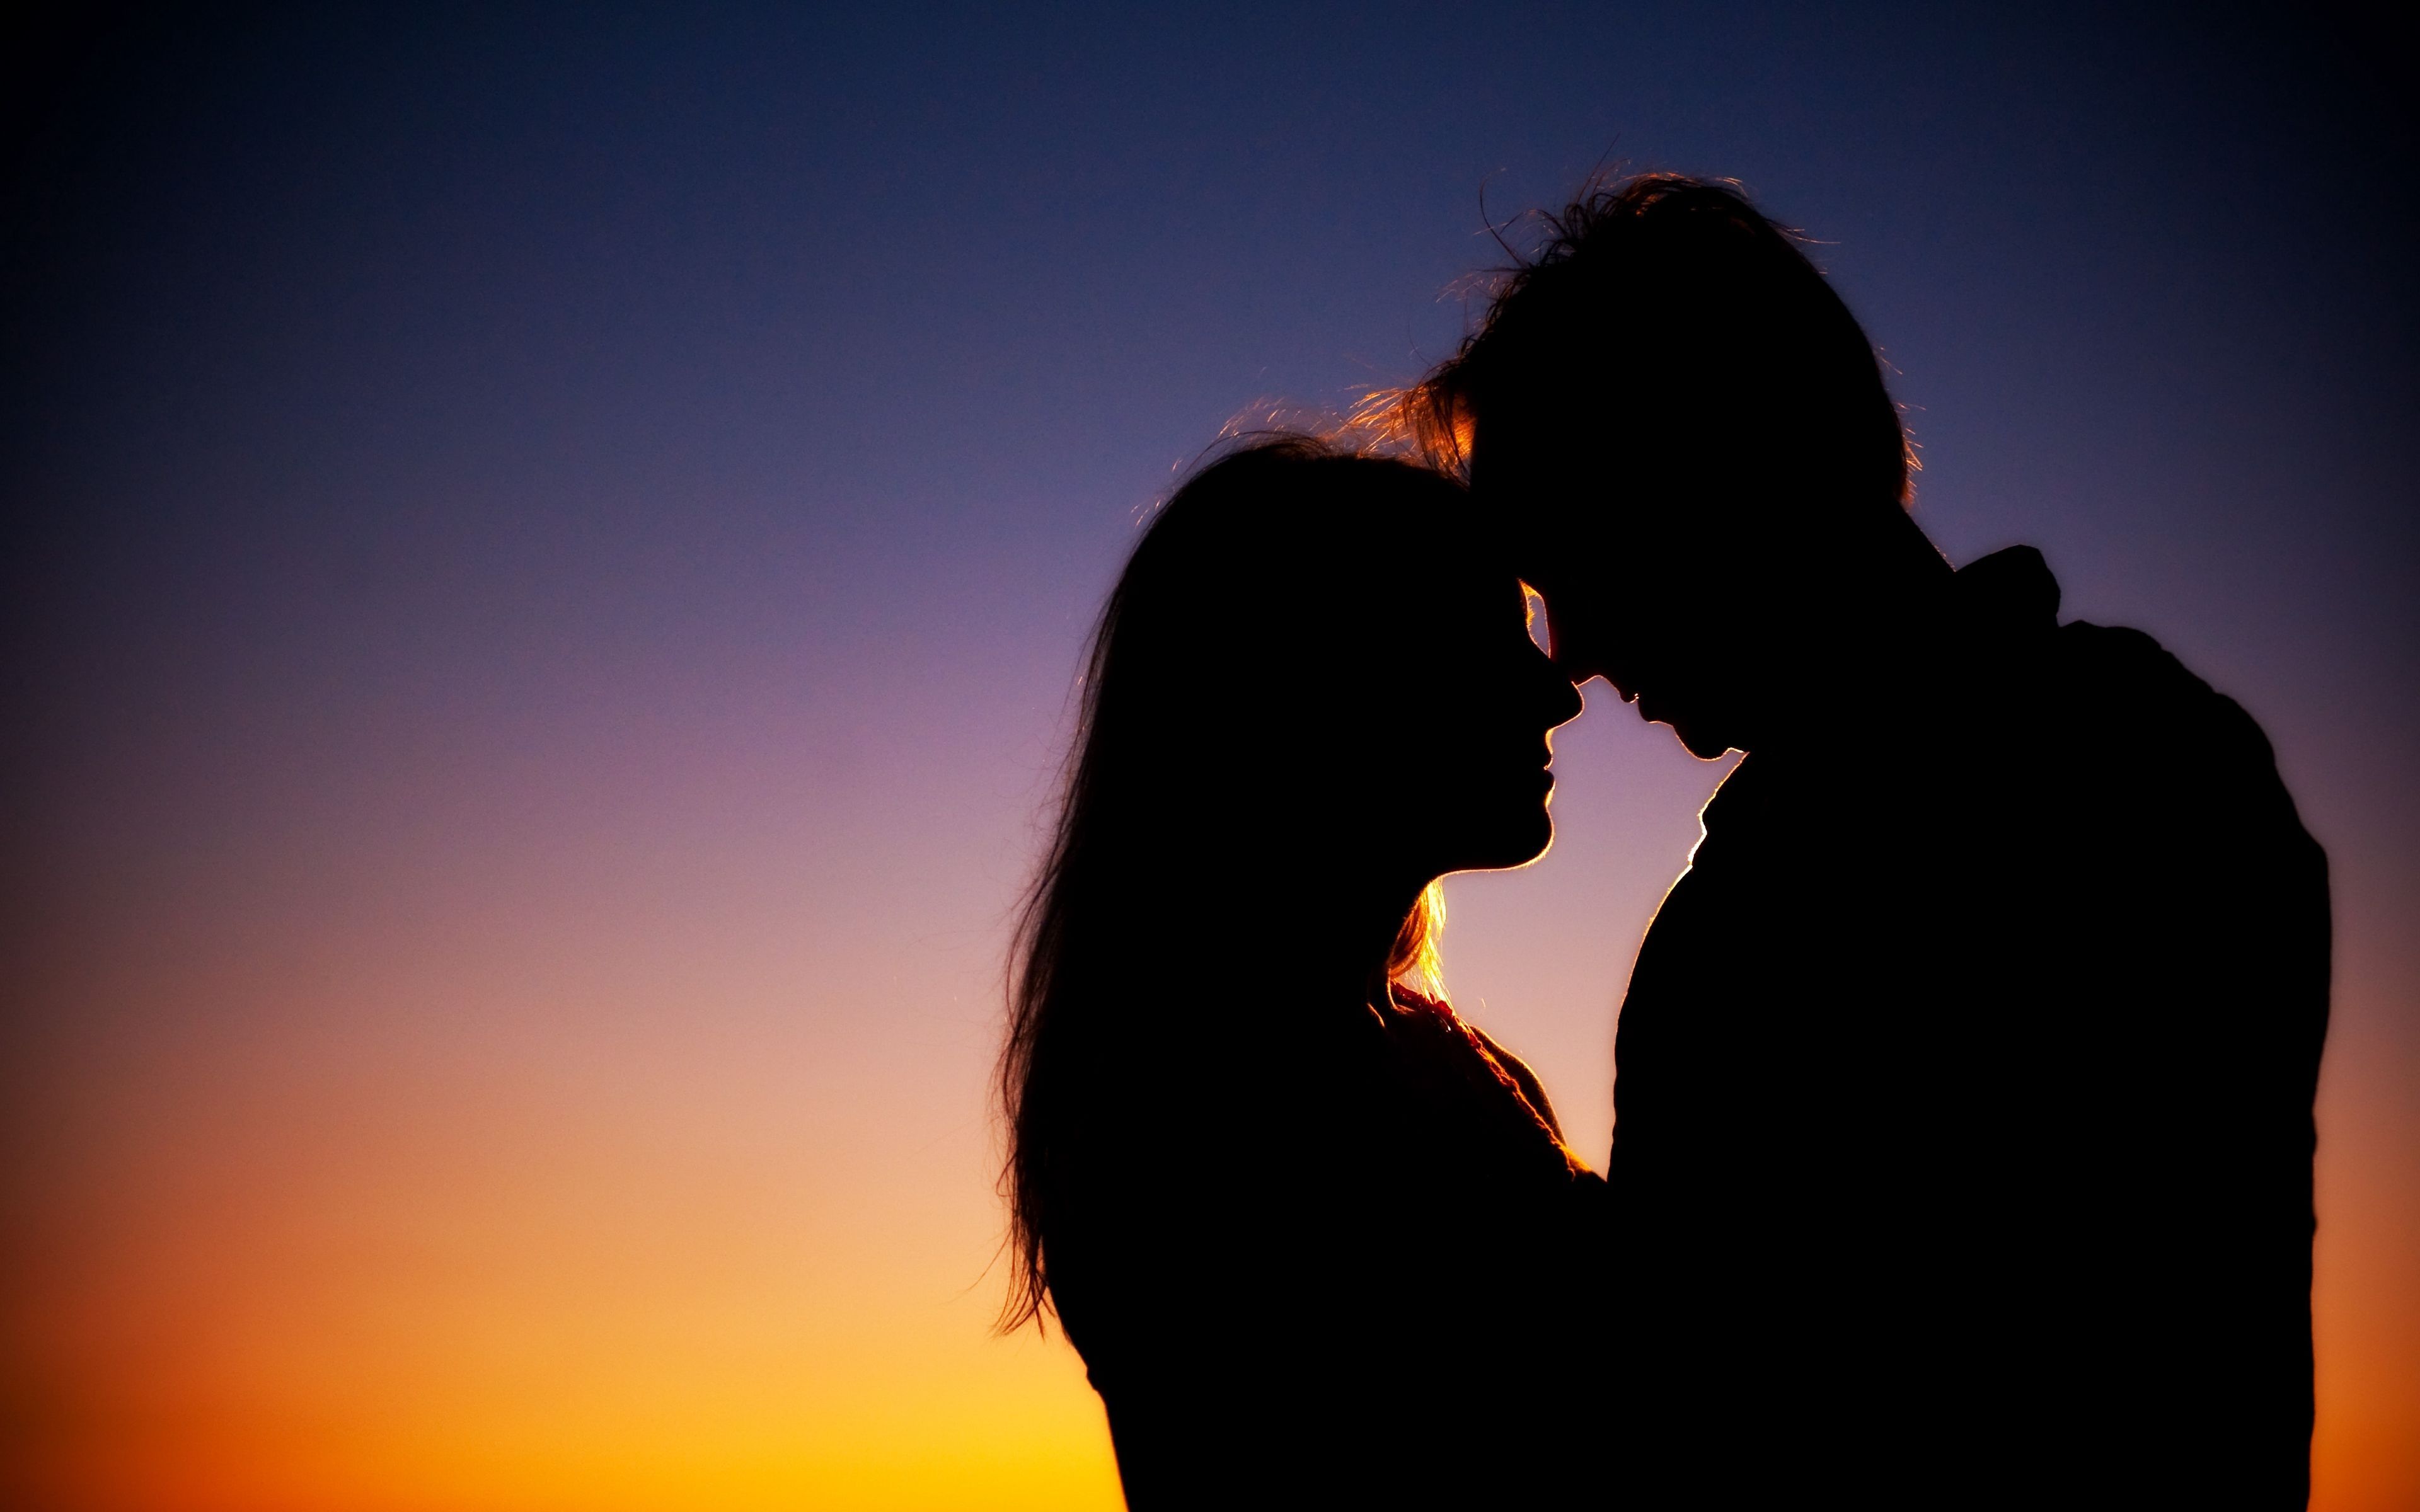 Download wallpaper 3840x2400 couple, silhouettes, love, night 4k ultra HD 16:10 HD background